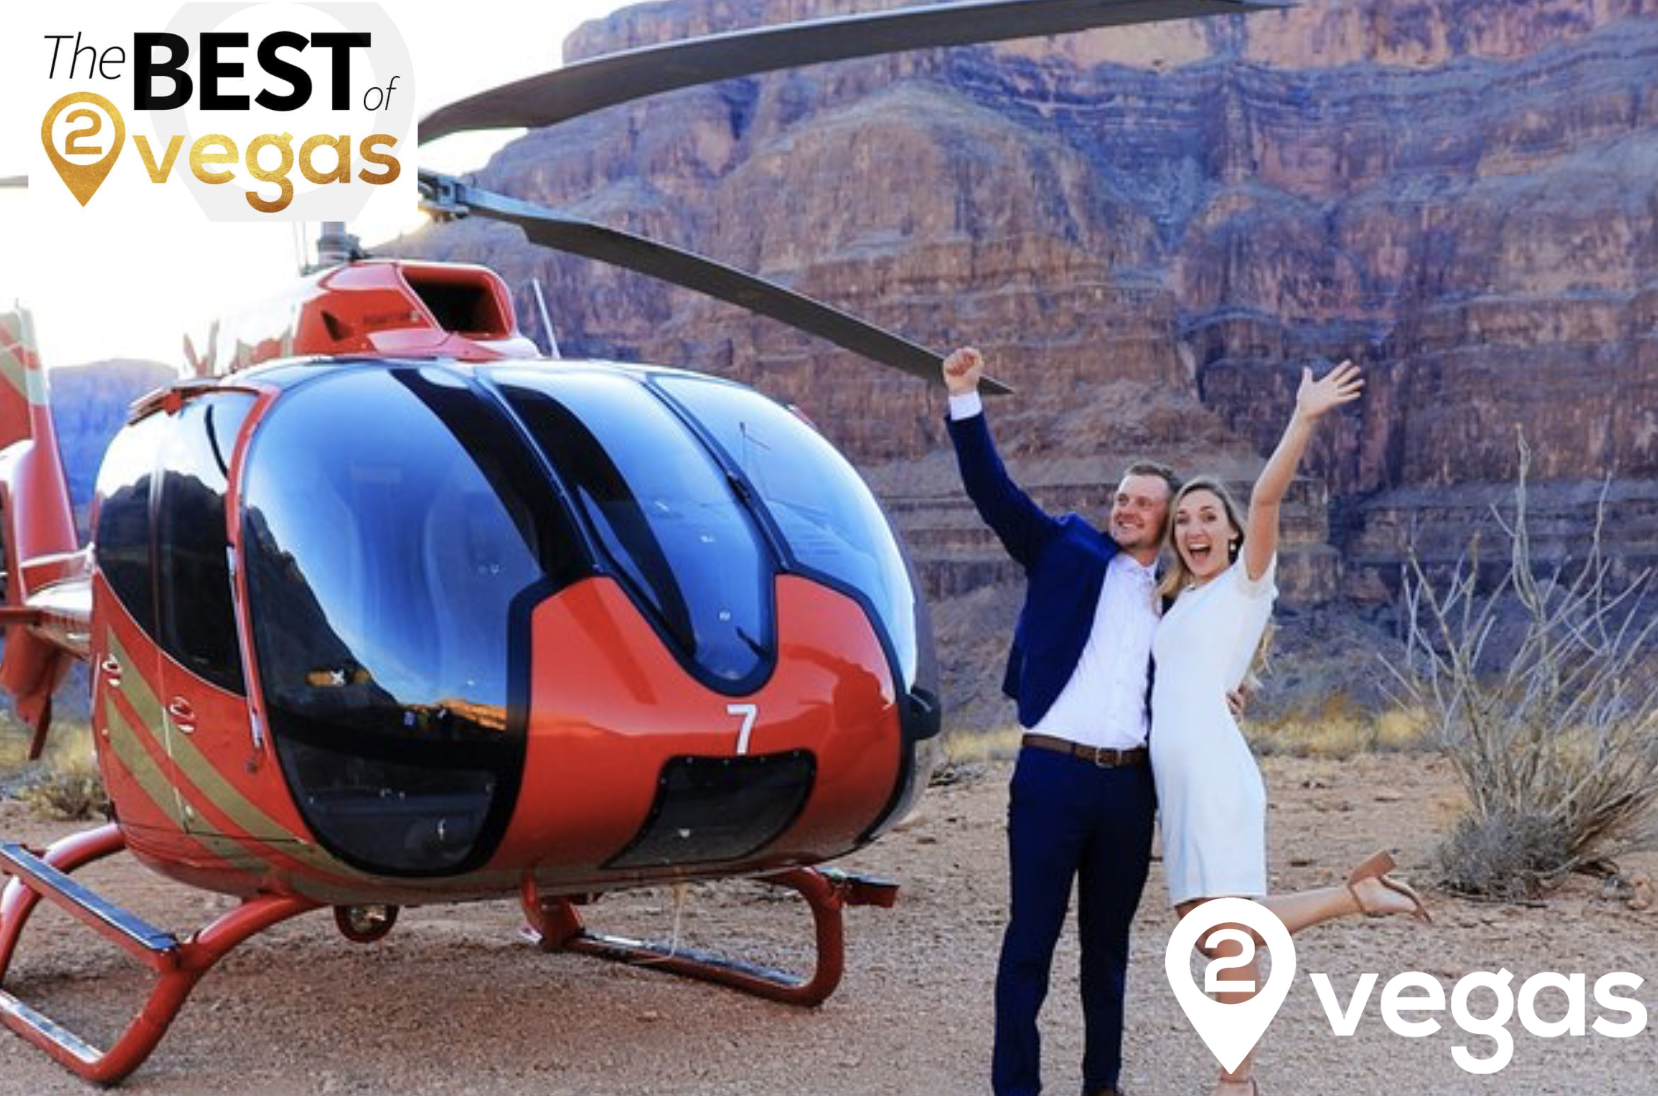 grand canyon helicopter tour from las vegas with champagne picnic